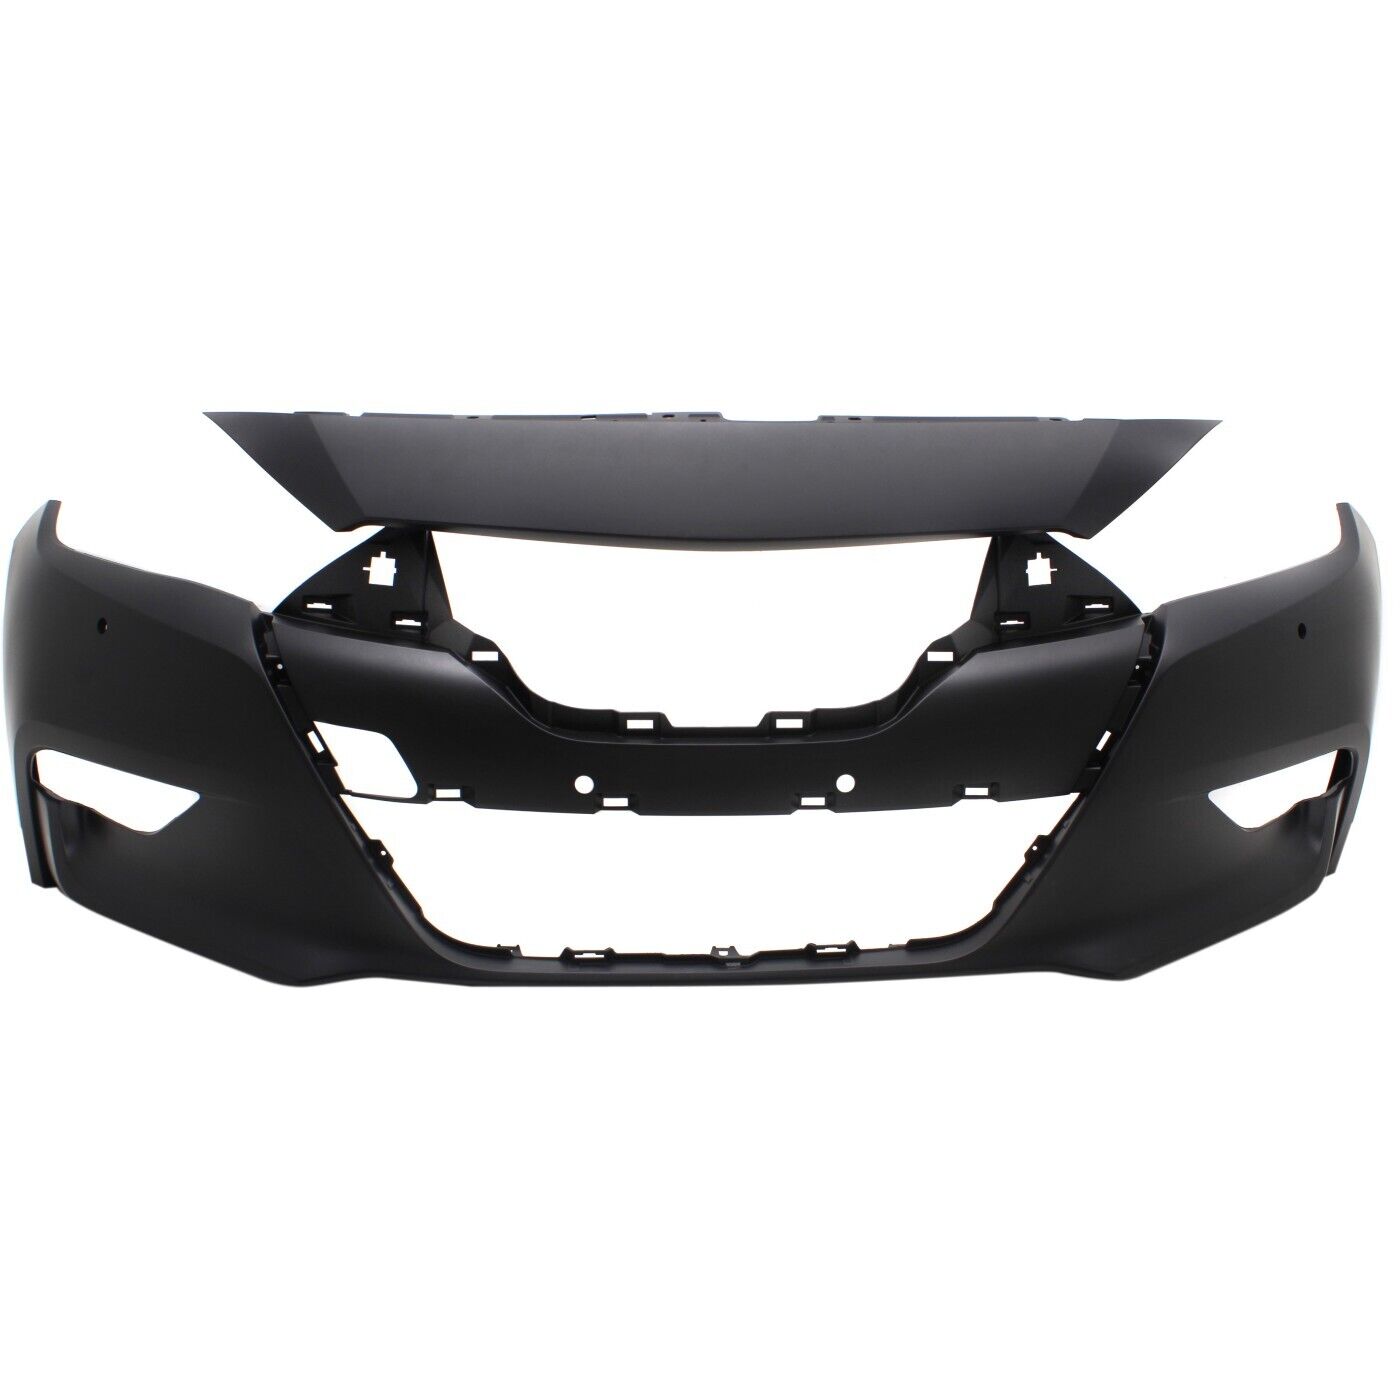 Front Bumper Cover For 16-18 Nissan Maxima Primed With Parking Aid Sensor Holes